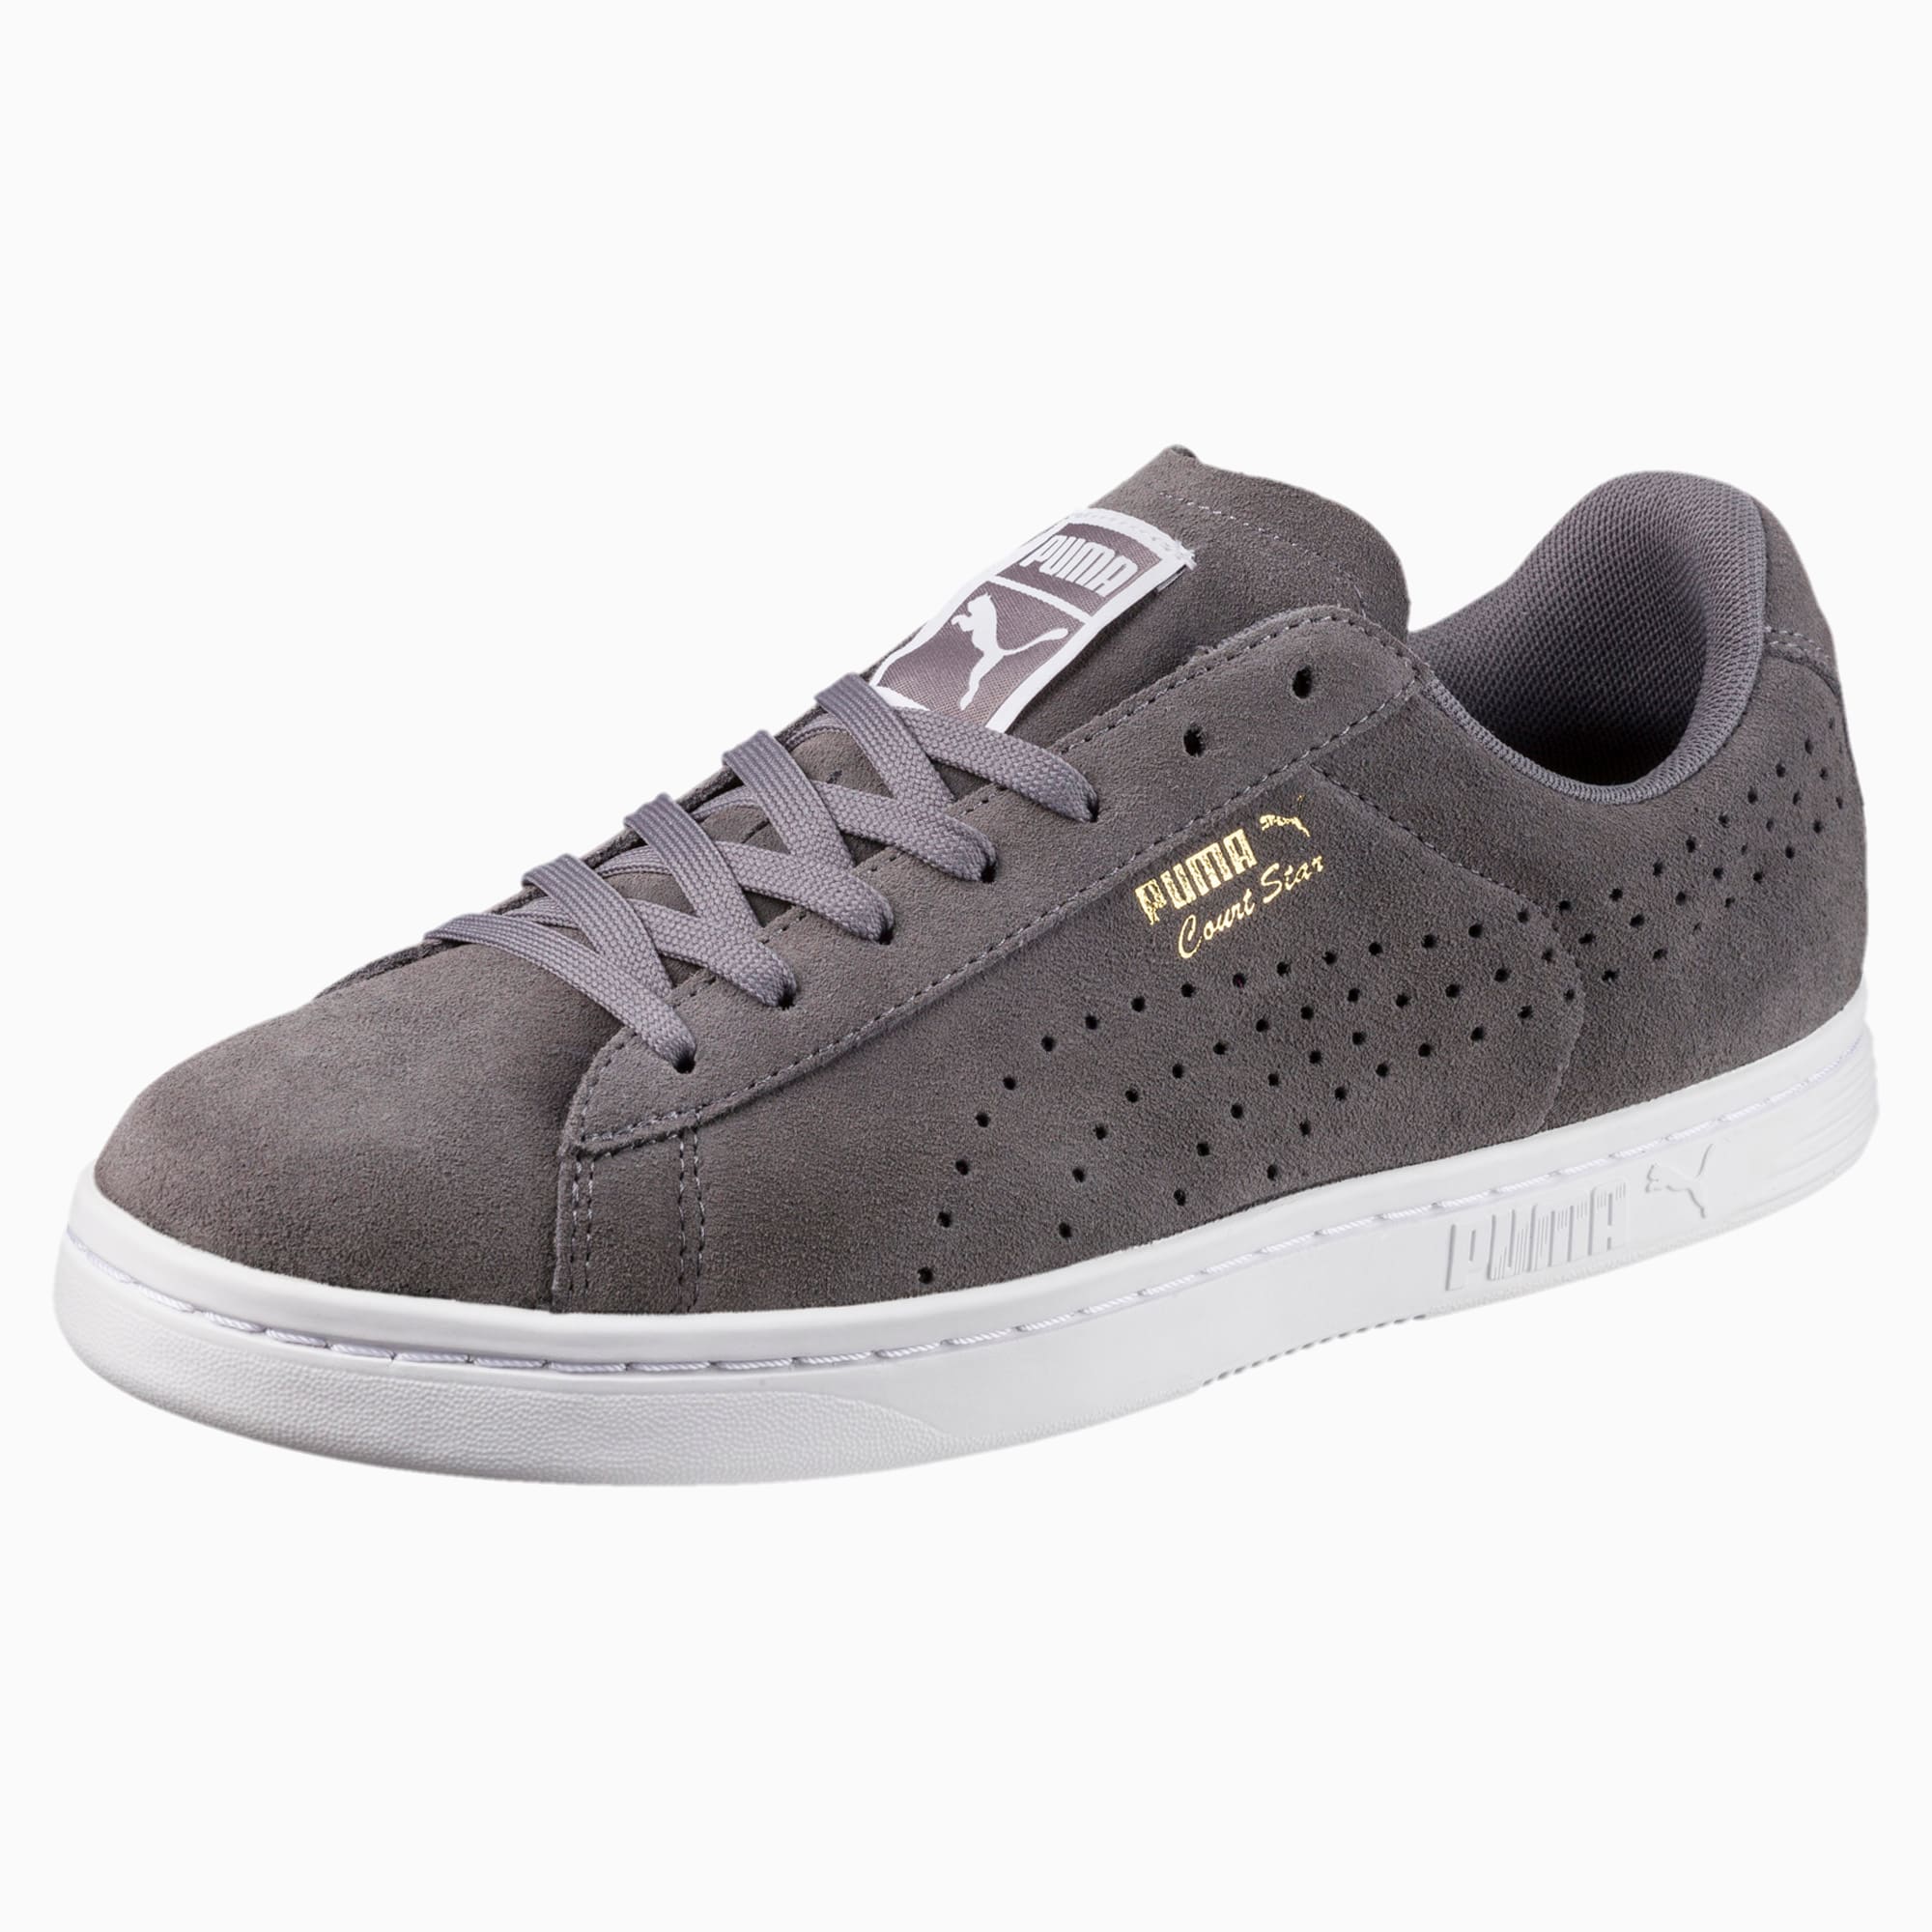 Court Star Suede Sneakers | PUMA US